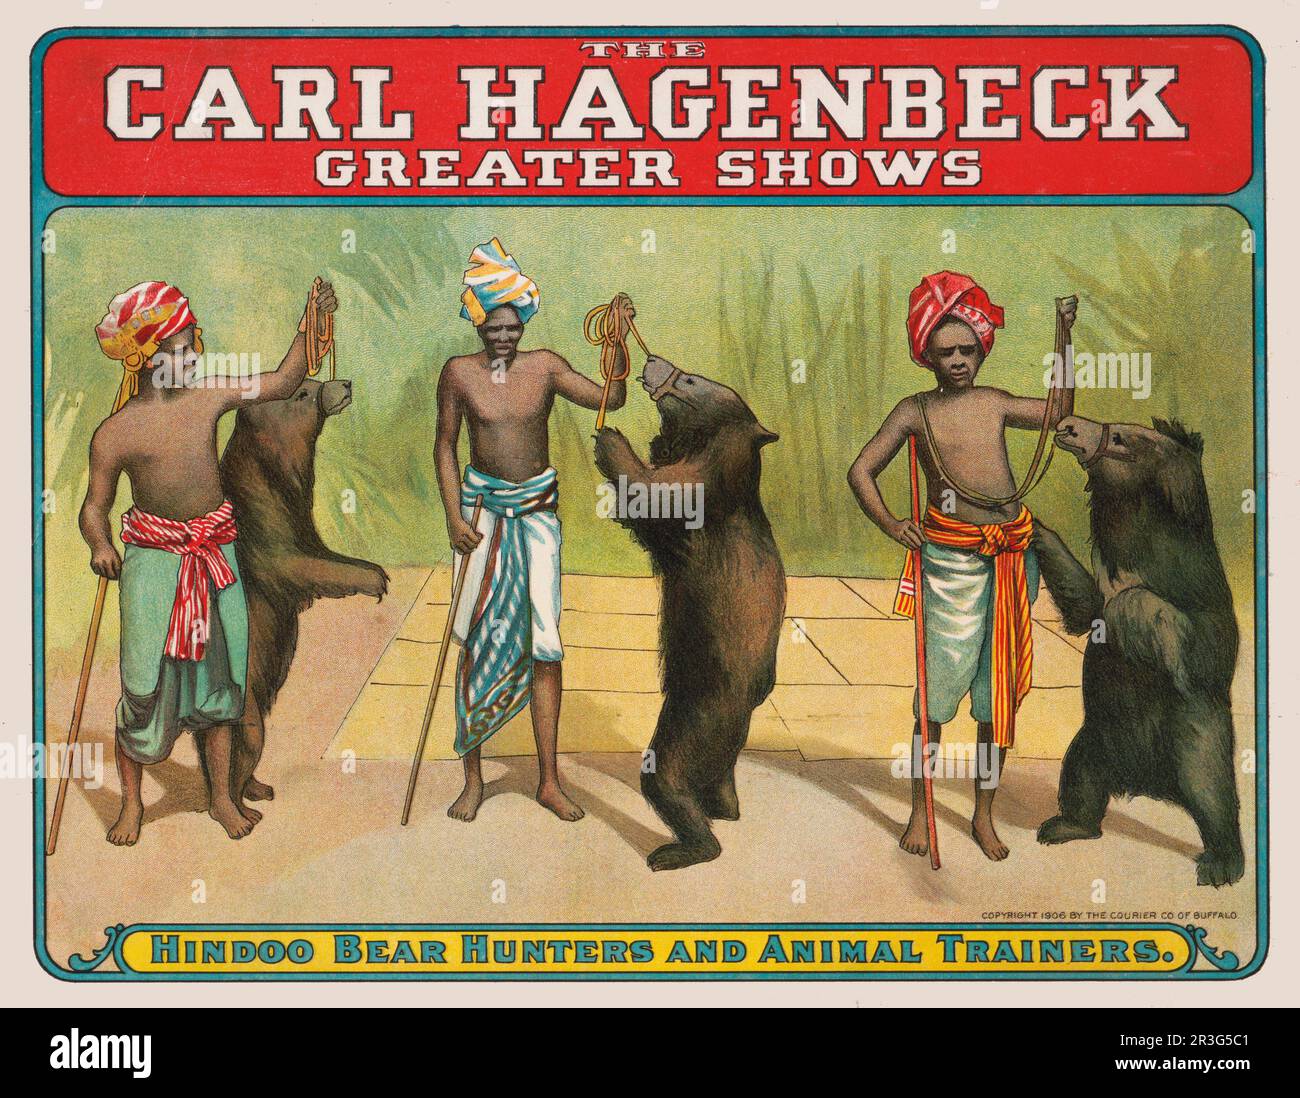 Vintage Carl Hagenbeck circus poster showing bears and Hindu trainers, circa 1906. Stock Photo